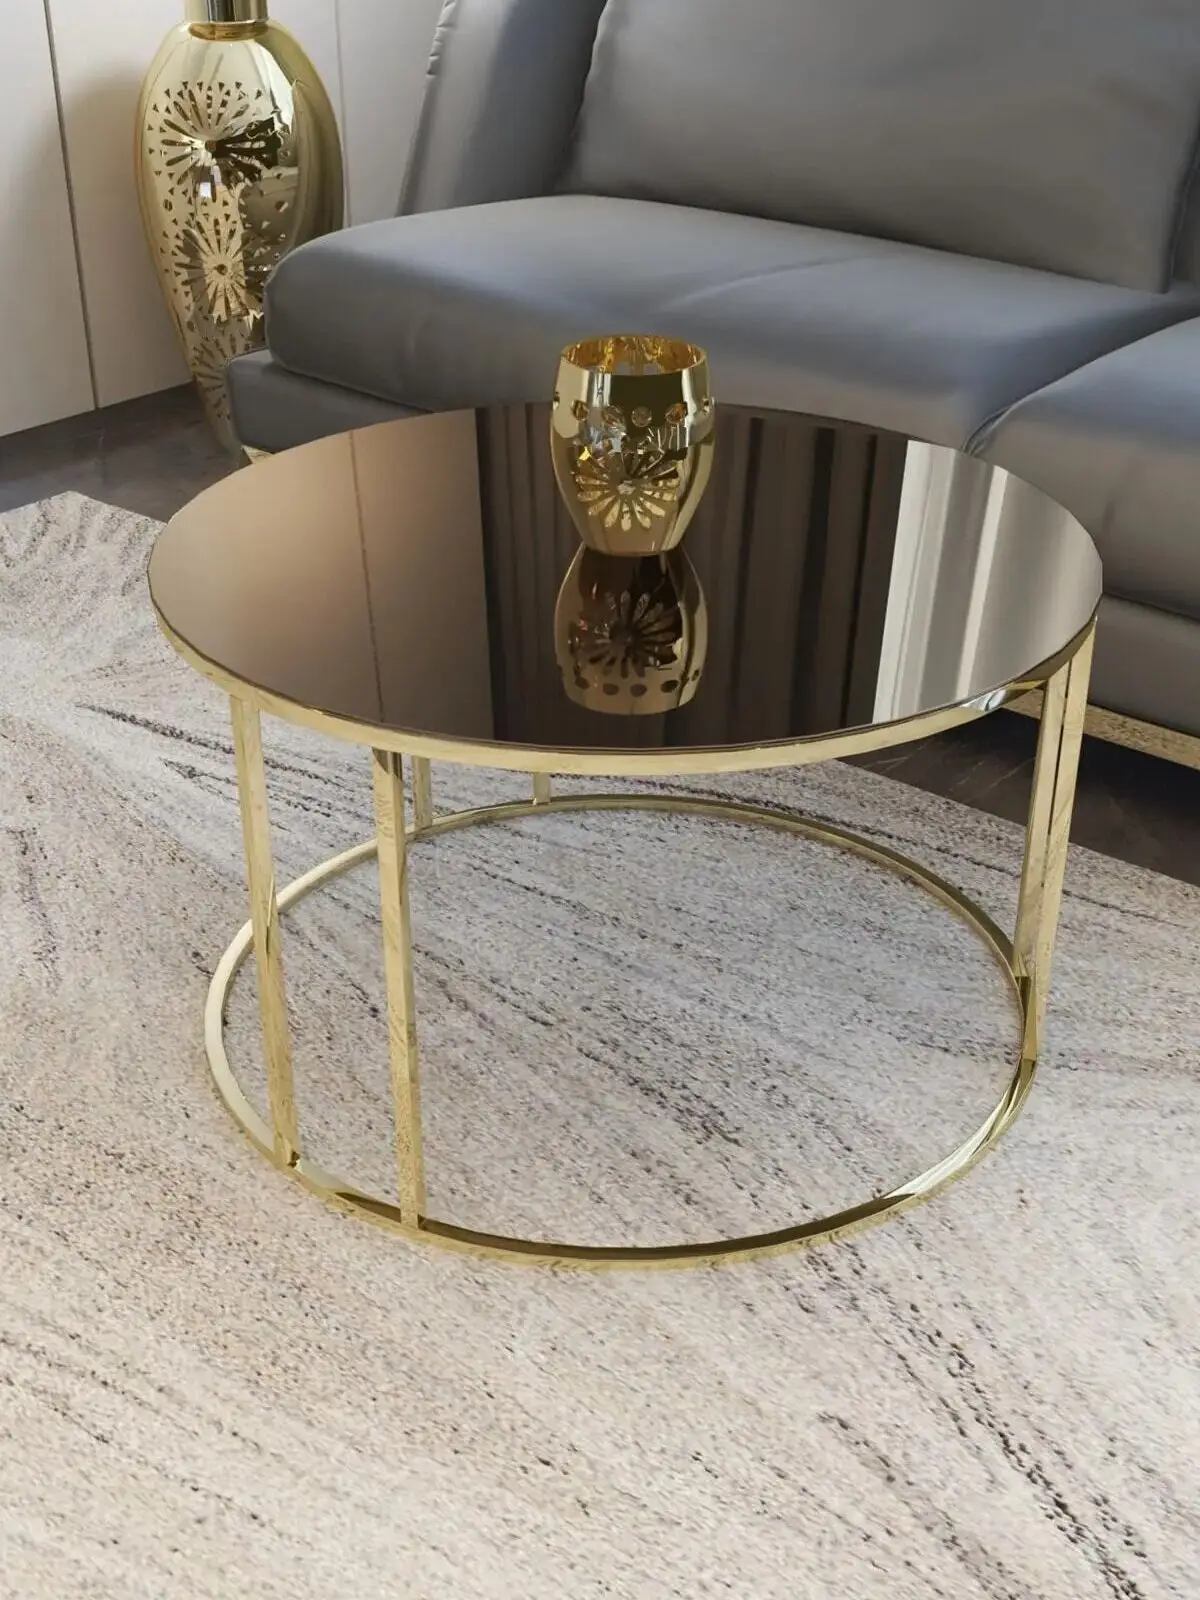 

Gold Metal Center Table Unbreakable Mirrored Glass Single Scandinavian Side Table Tea Coffee Service Table Round Living Room Bed